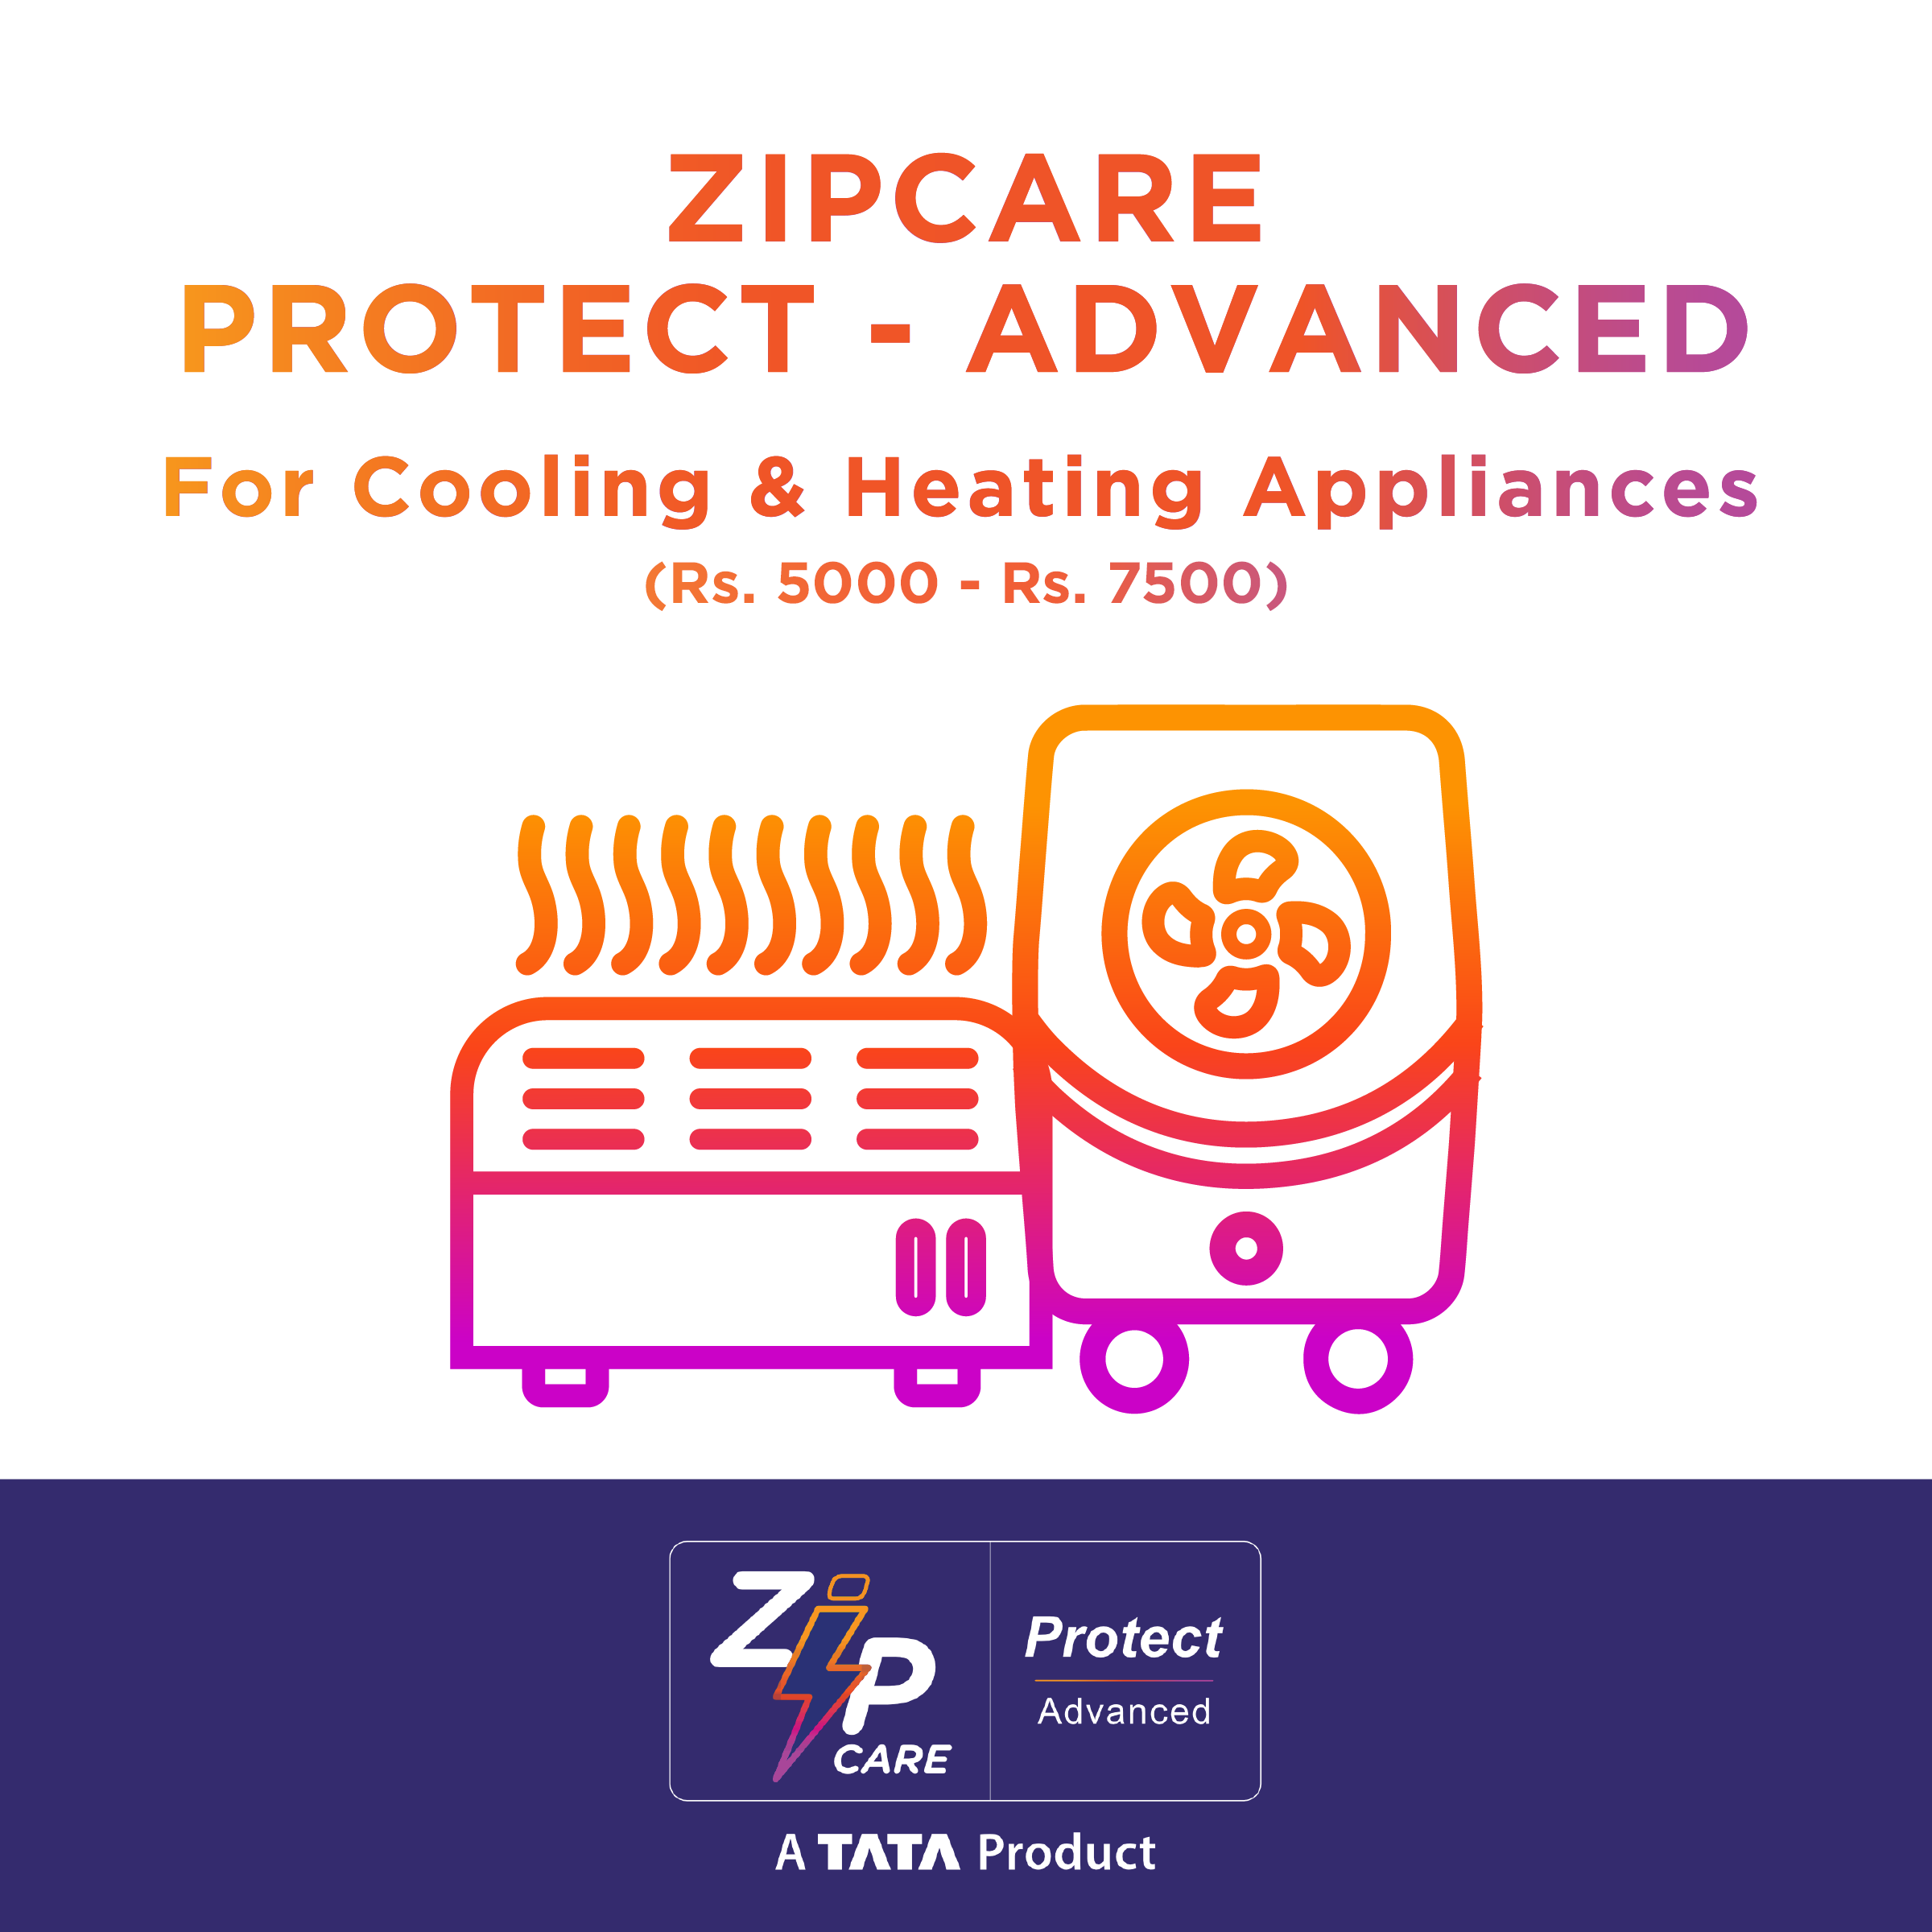 ZipCare Protect Advanced 2 Years for Cooling & Heating Appliances (Rs. 5000 - Rs. 7500)_1